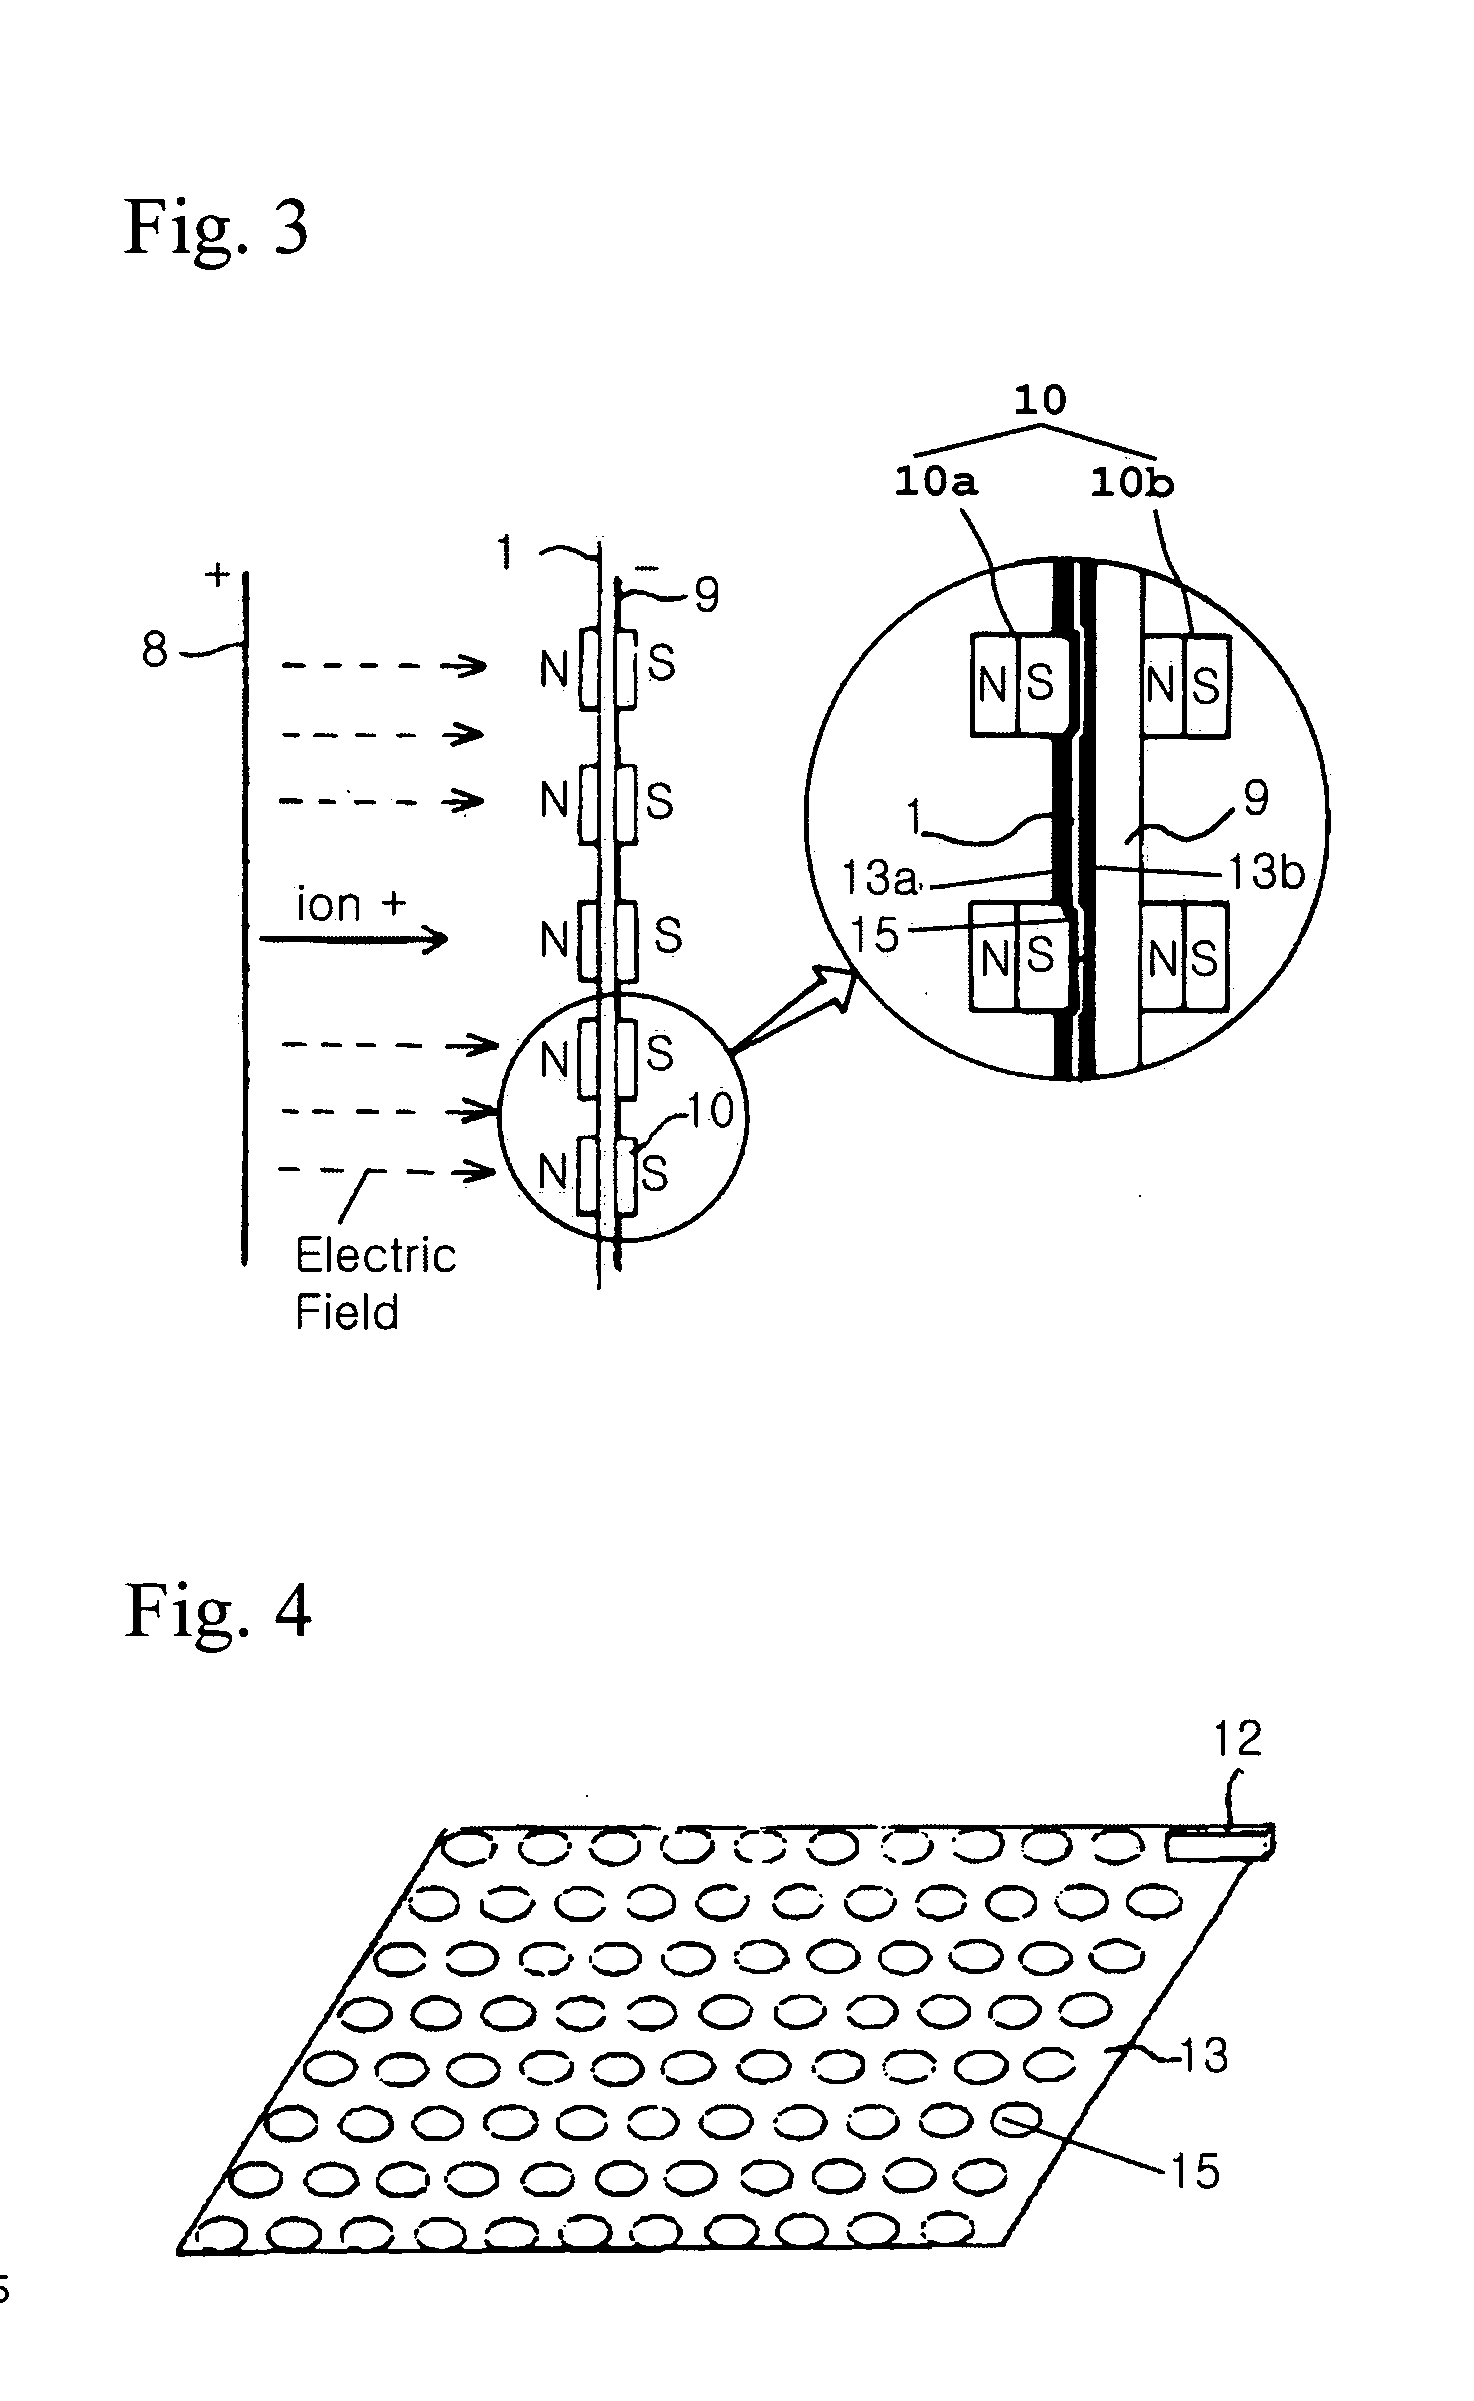 Method for manufacturing heating pad using electrically conductive polymer